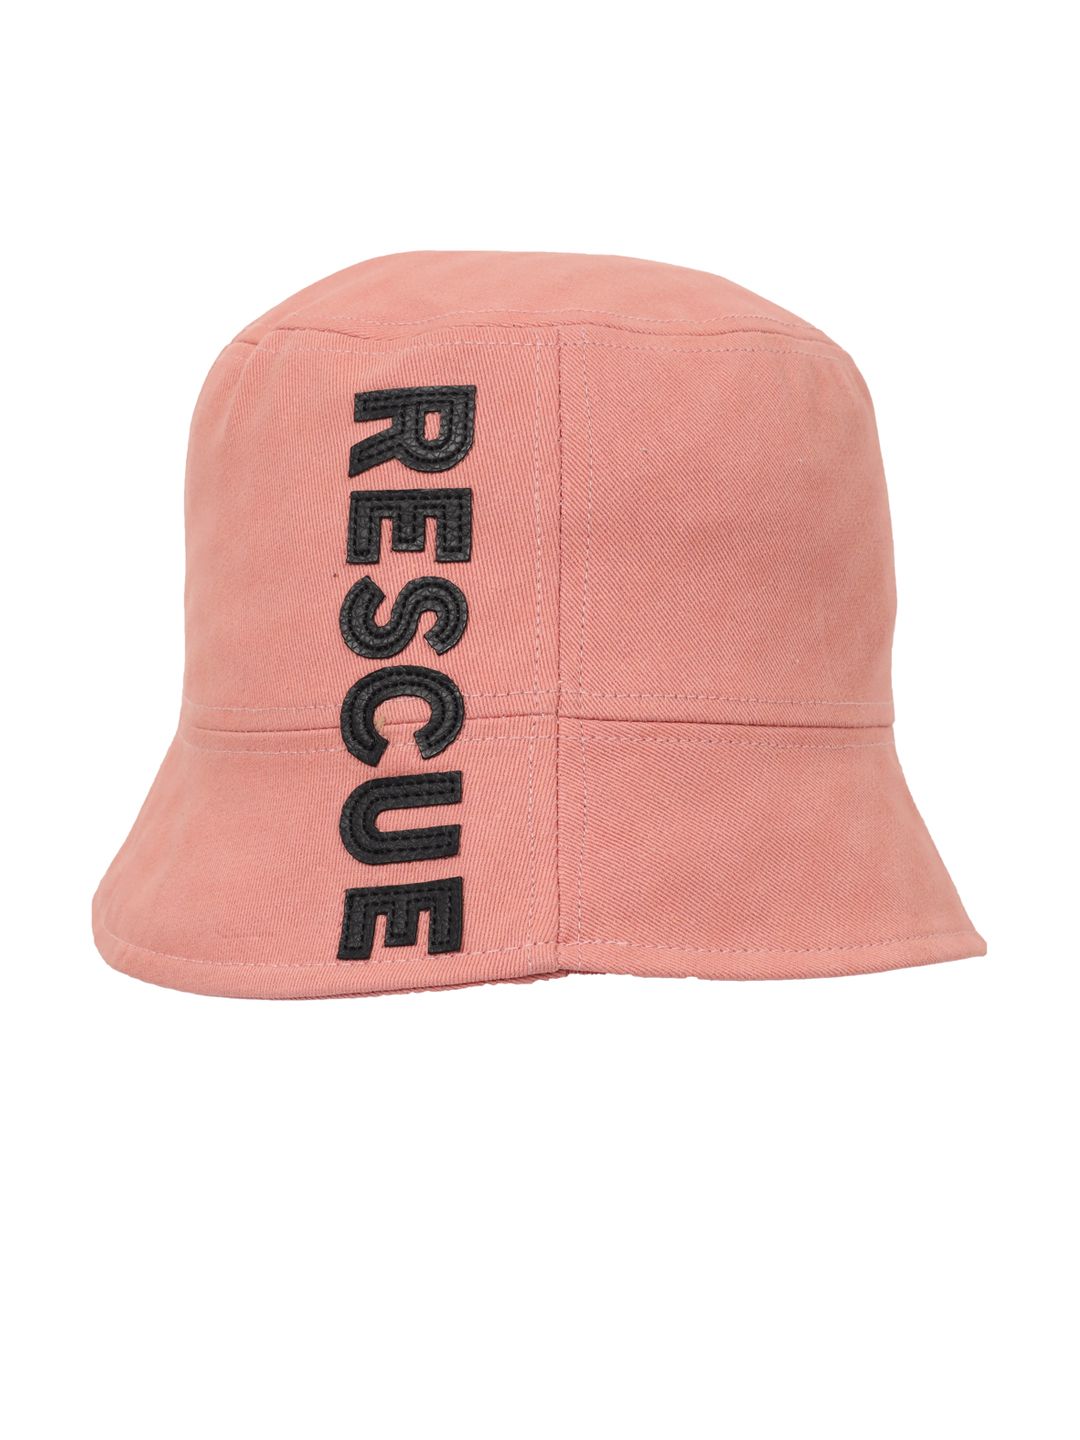 FabSeasons Pink & Black Printed Pure Cotton Bucket Hat Price in India